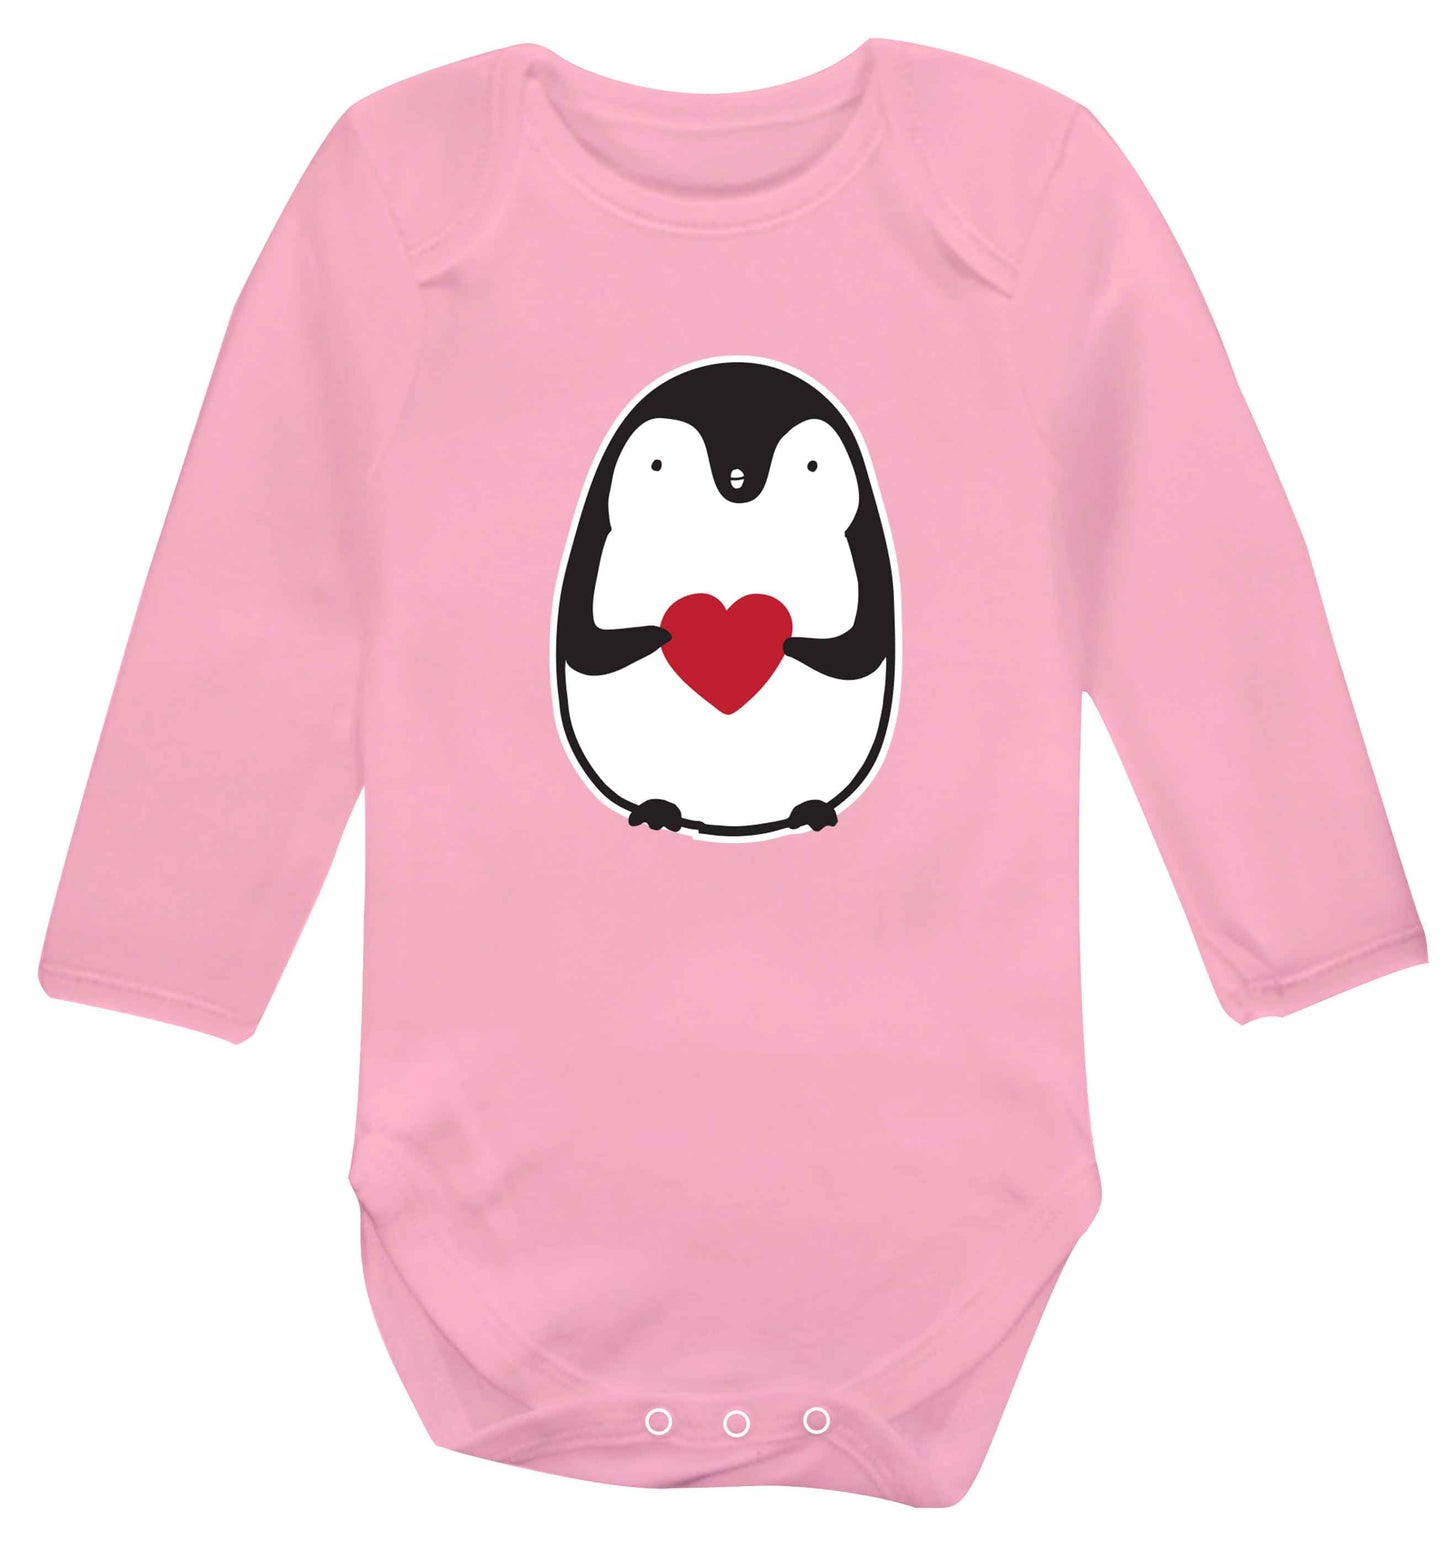 Cute penguin heart baby vest long sleeved pale pink 6-12 months